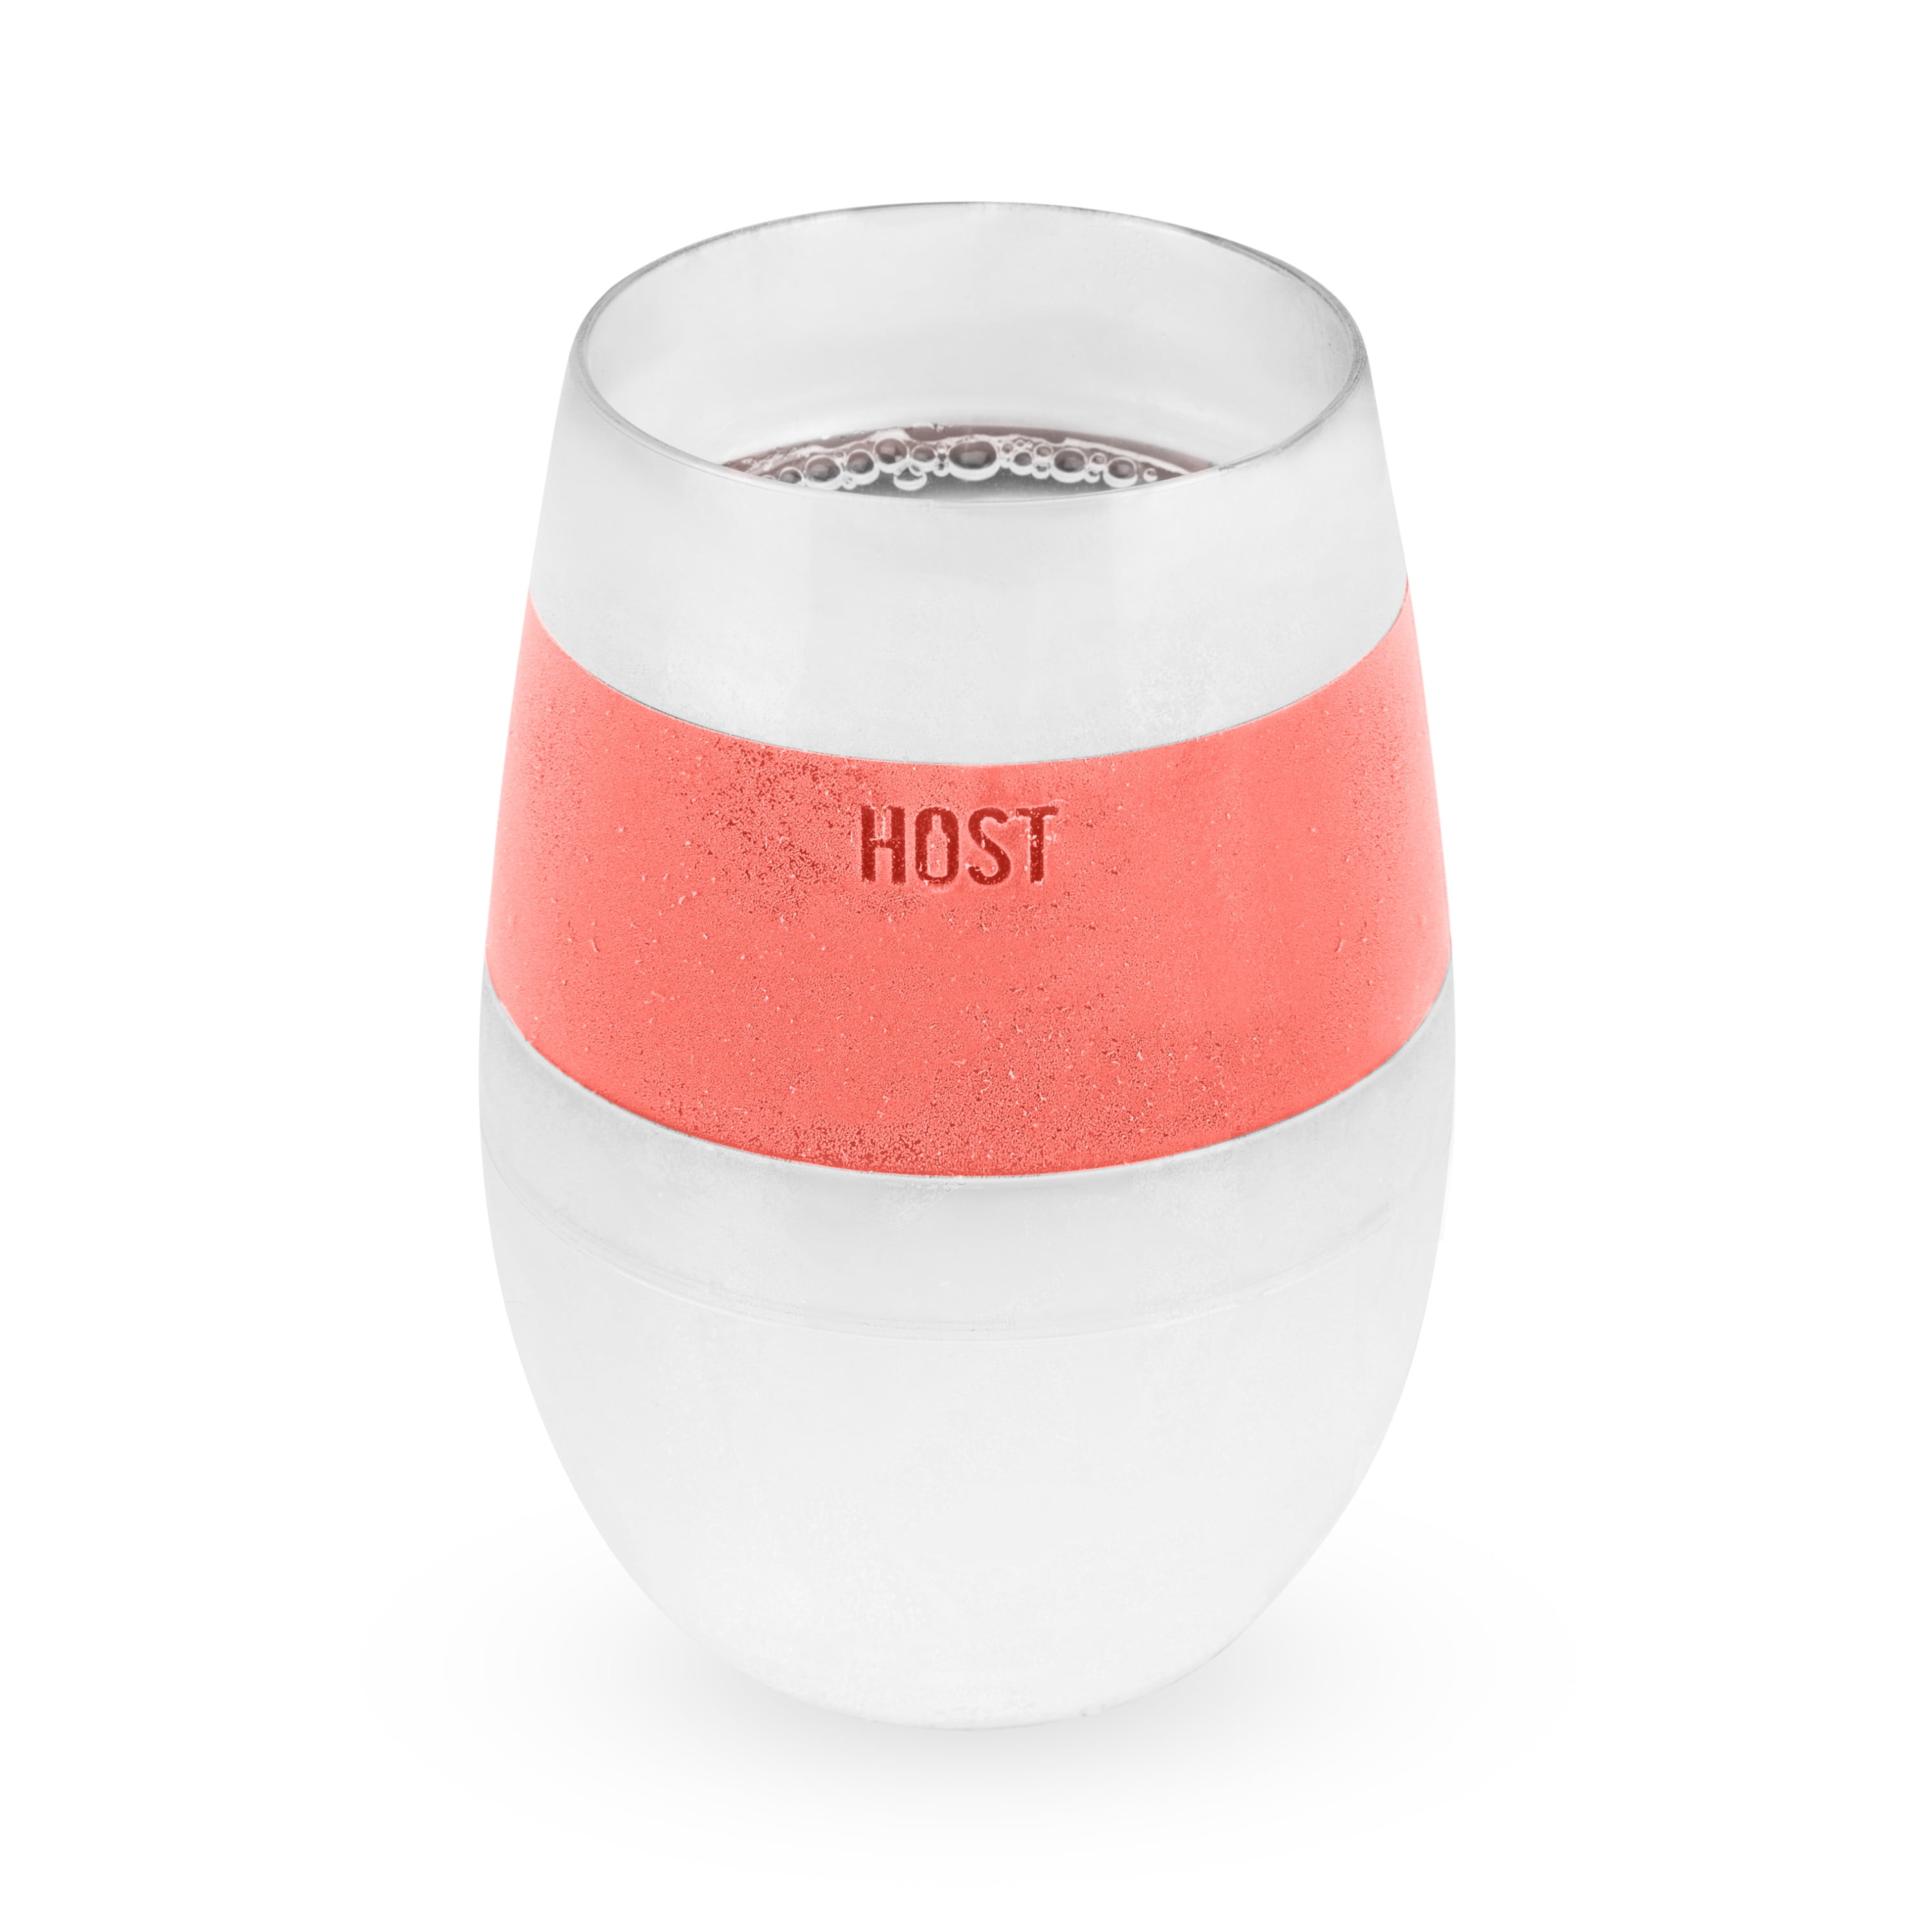 Wine Freeze Cooling Cups By Host - Amber Marie and Company